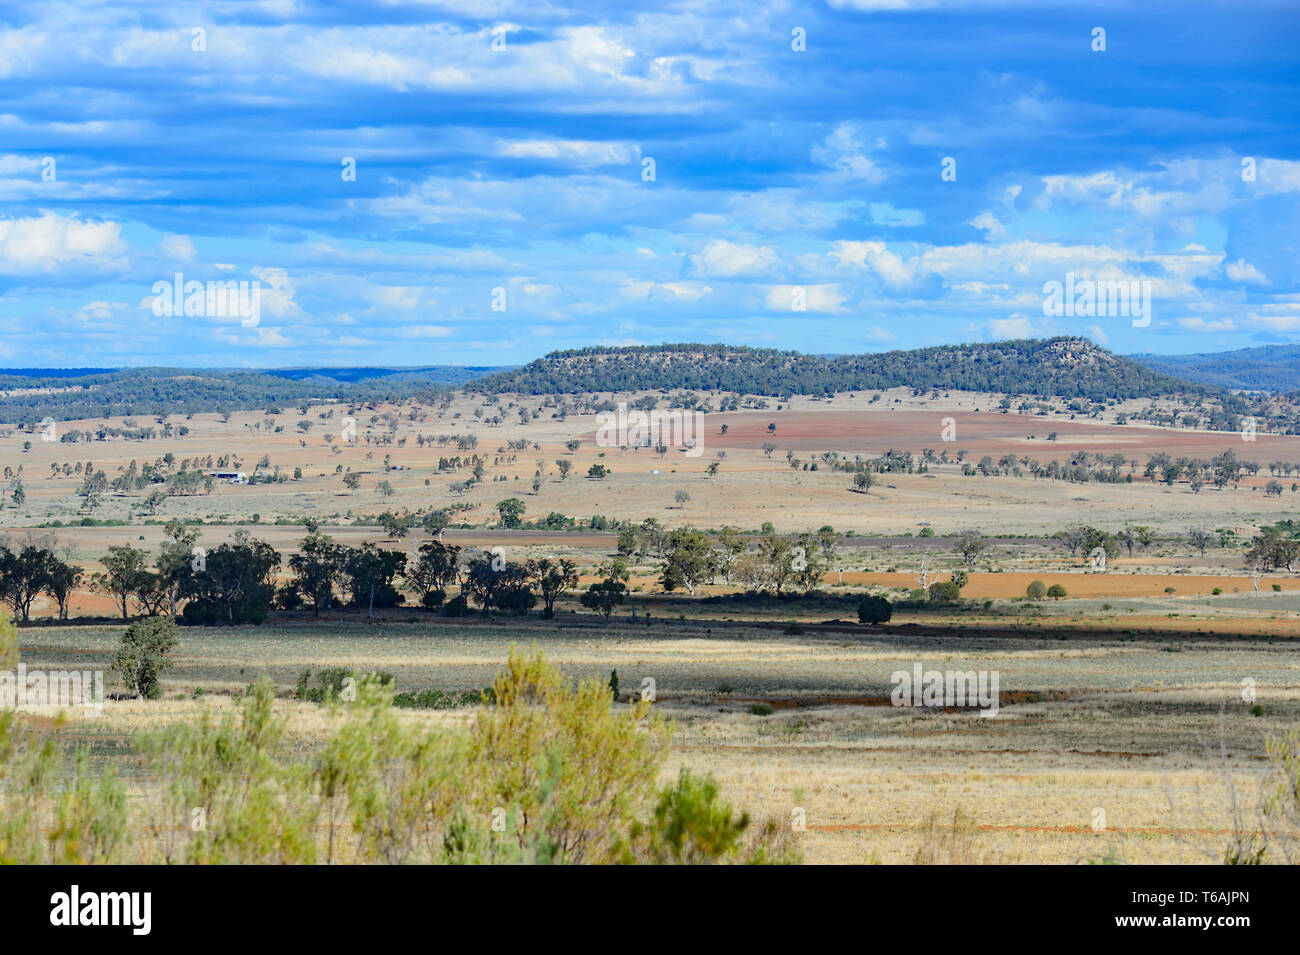 Picturesque scenery along the Carnarvon Highway, Queensland, QLD, Australia Stock Photo